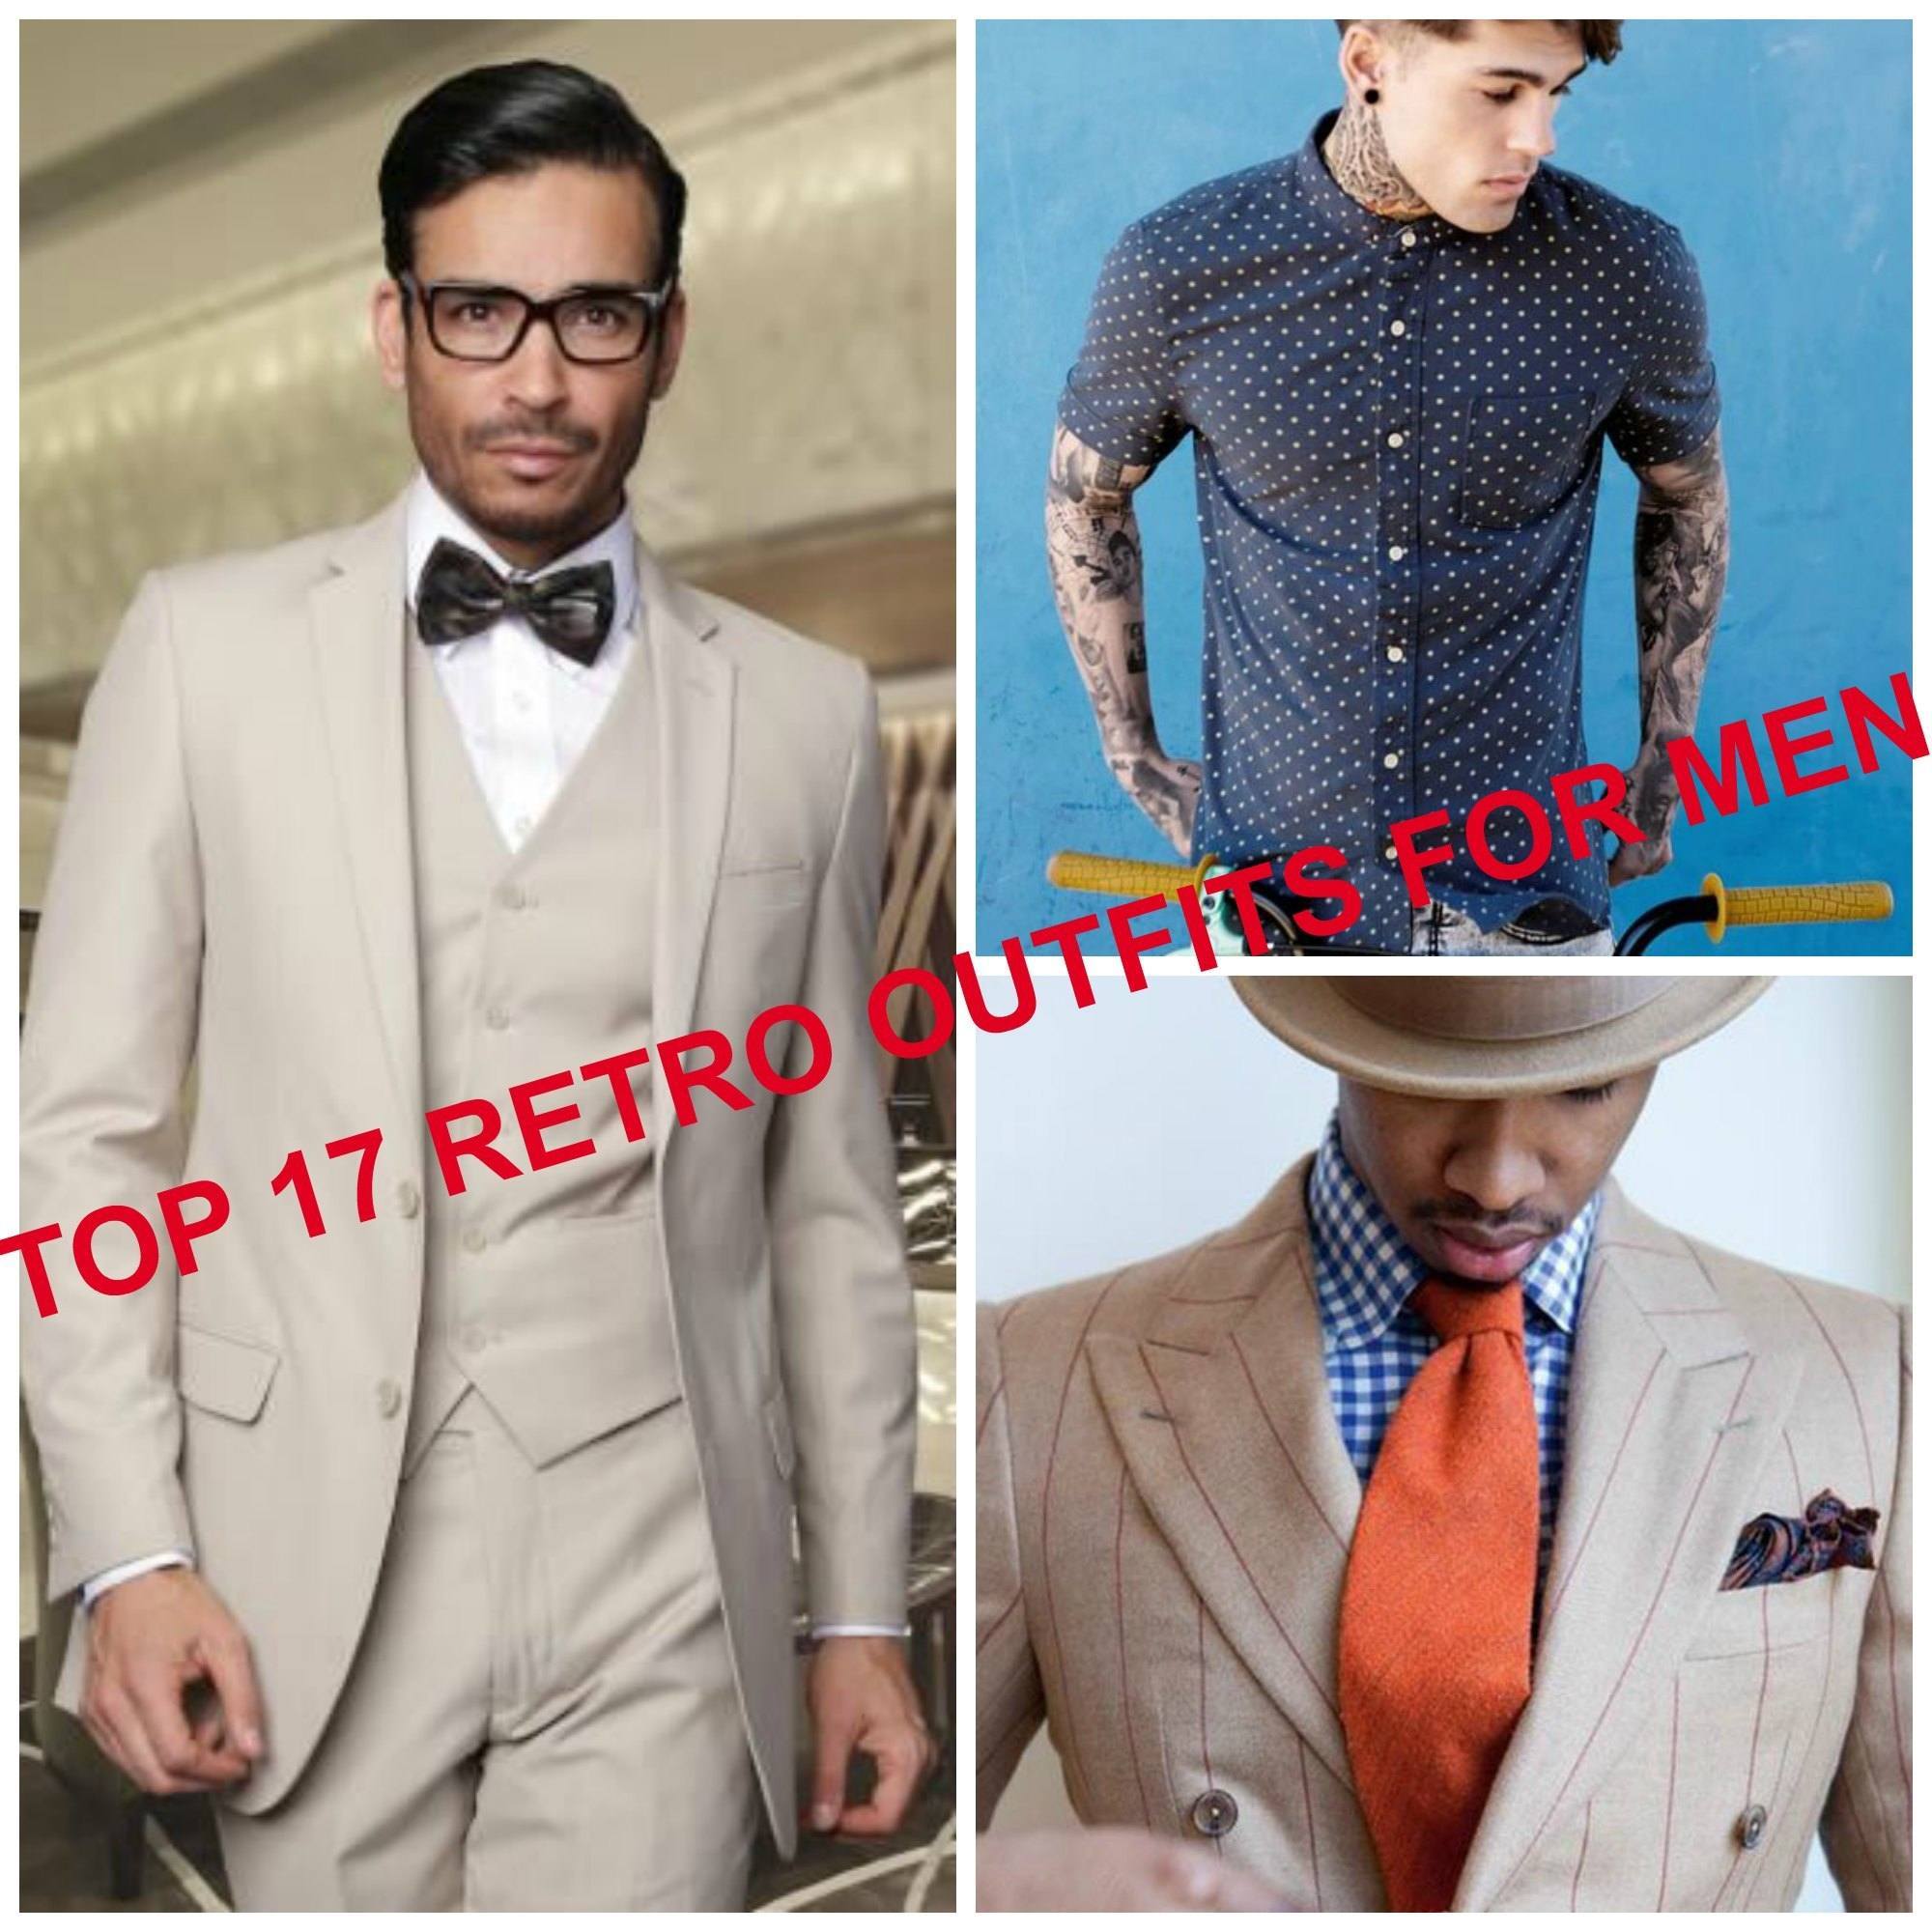 Retro Outfits For Men – 17 Ways To Wear Retro Outfits This Year